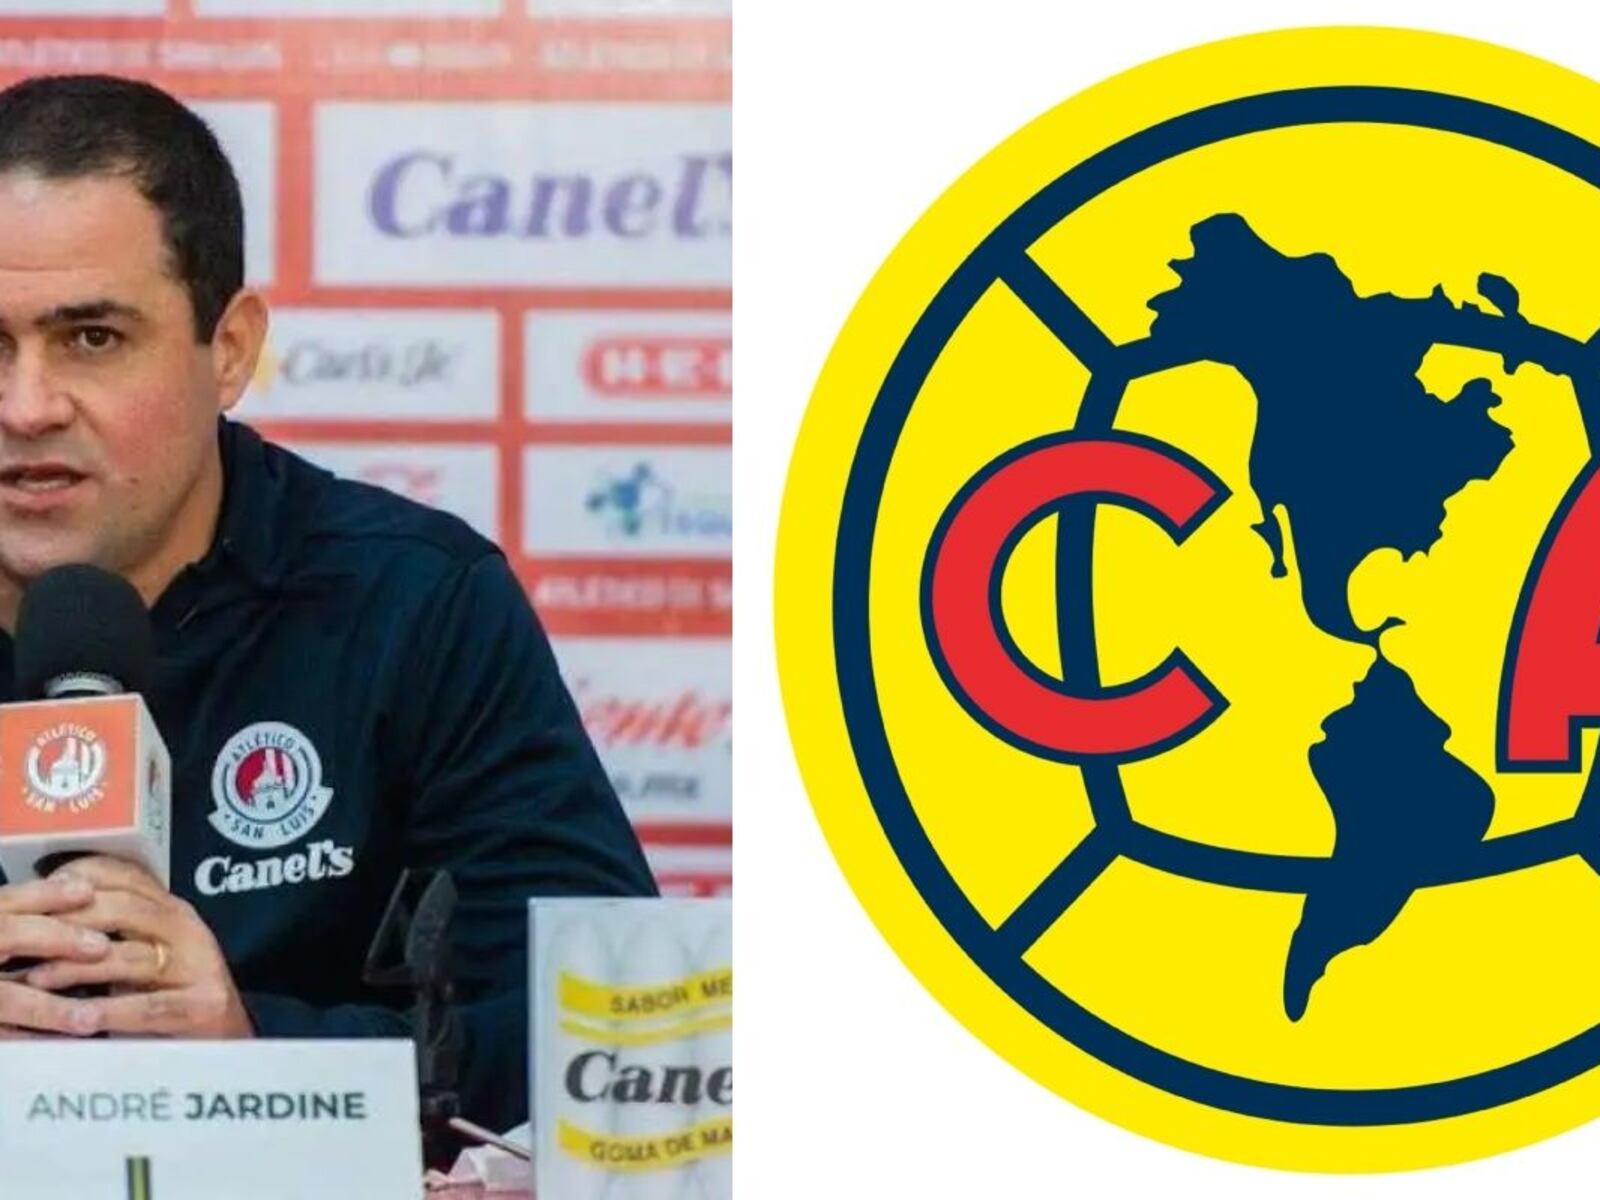 Welcome to Club América André Jardine, the signing that is paralyzing all of Mexico